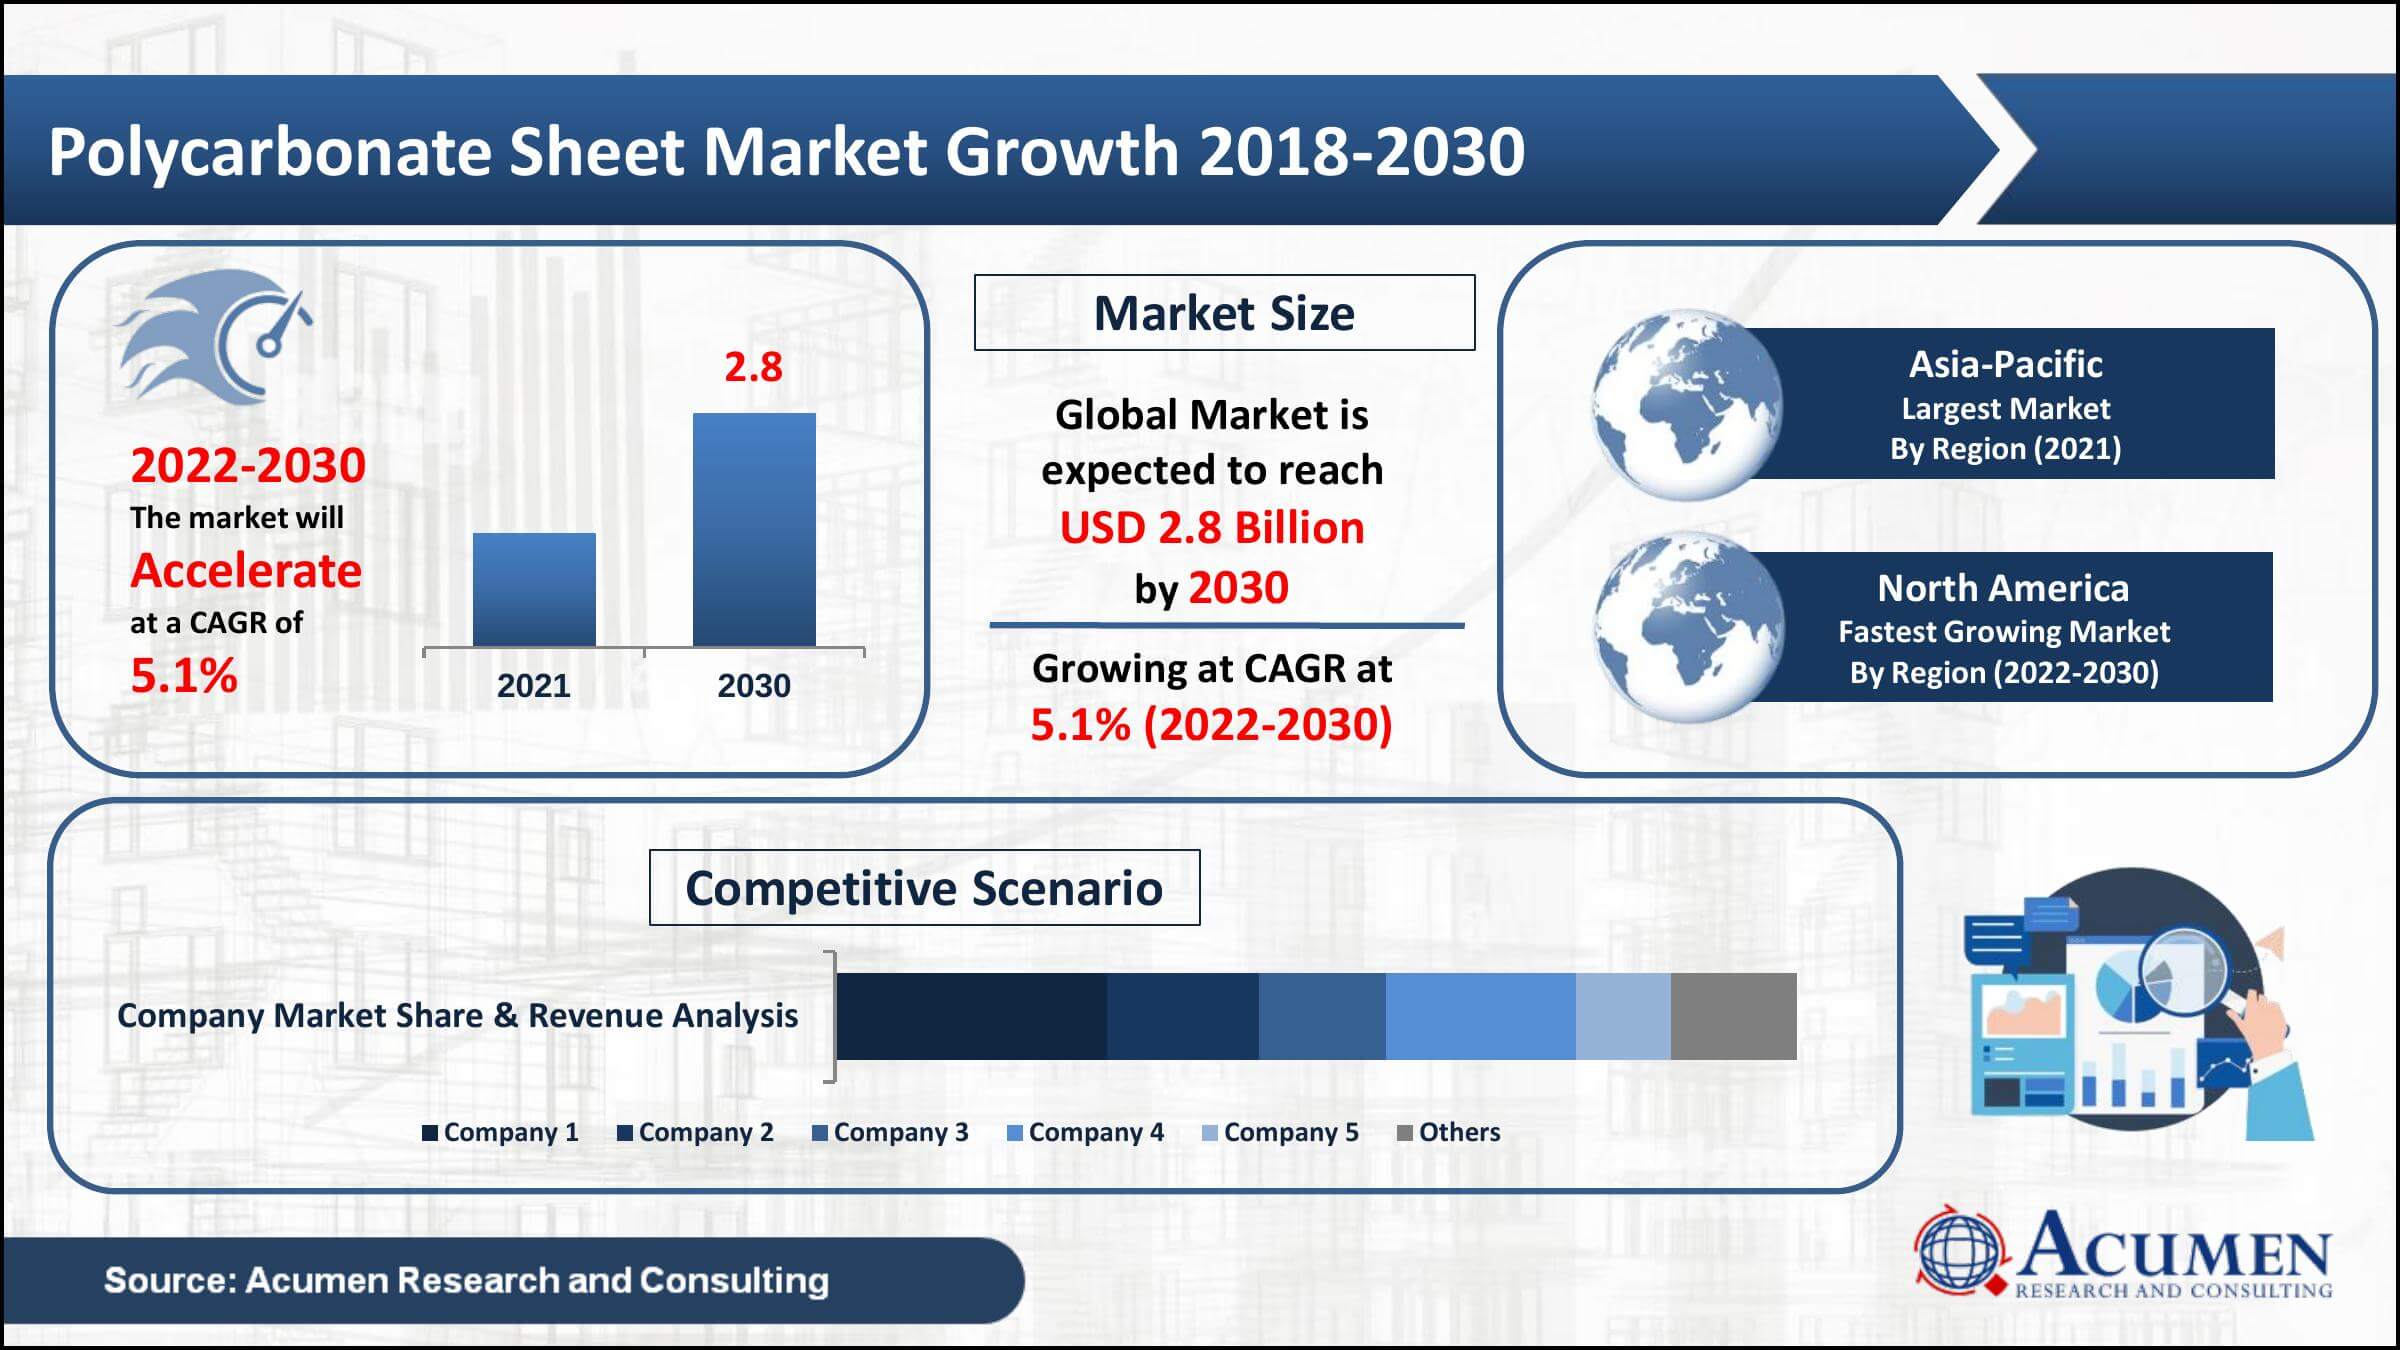 Global polycarbonate sheet market revenue was worth USD 1.8 Billion in 2021, with a 5.1% CAGR from 2022 to 2030